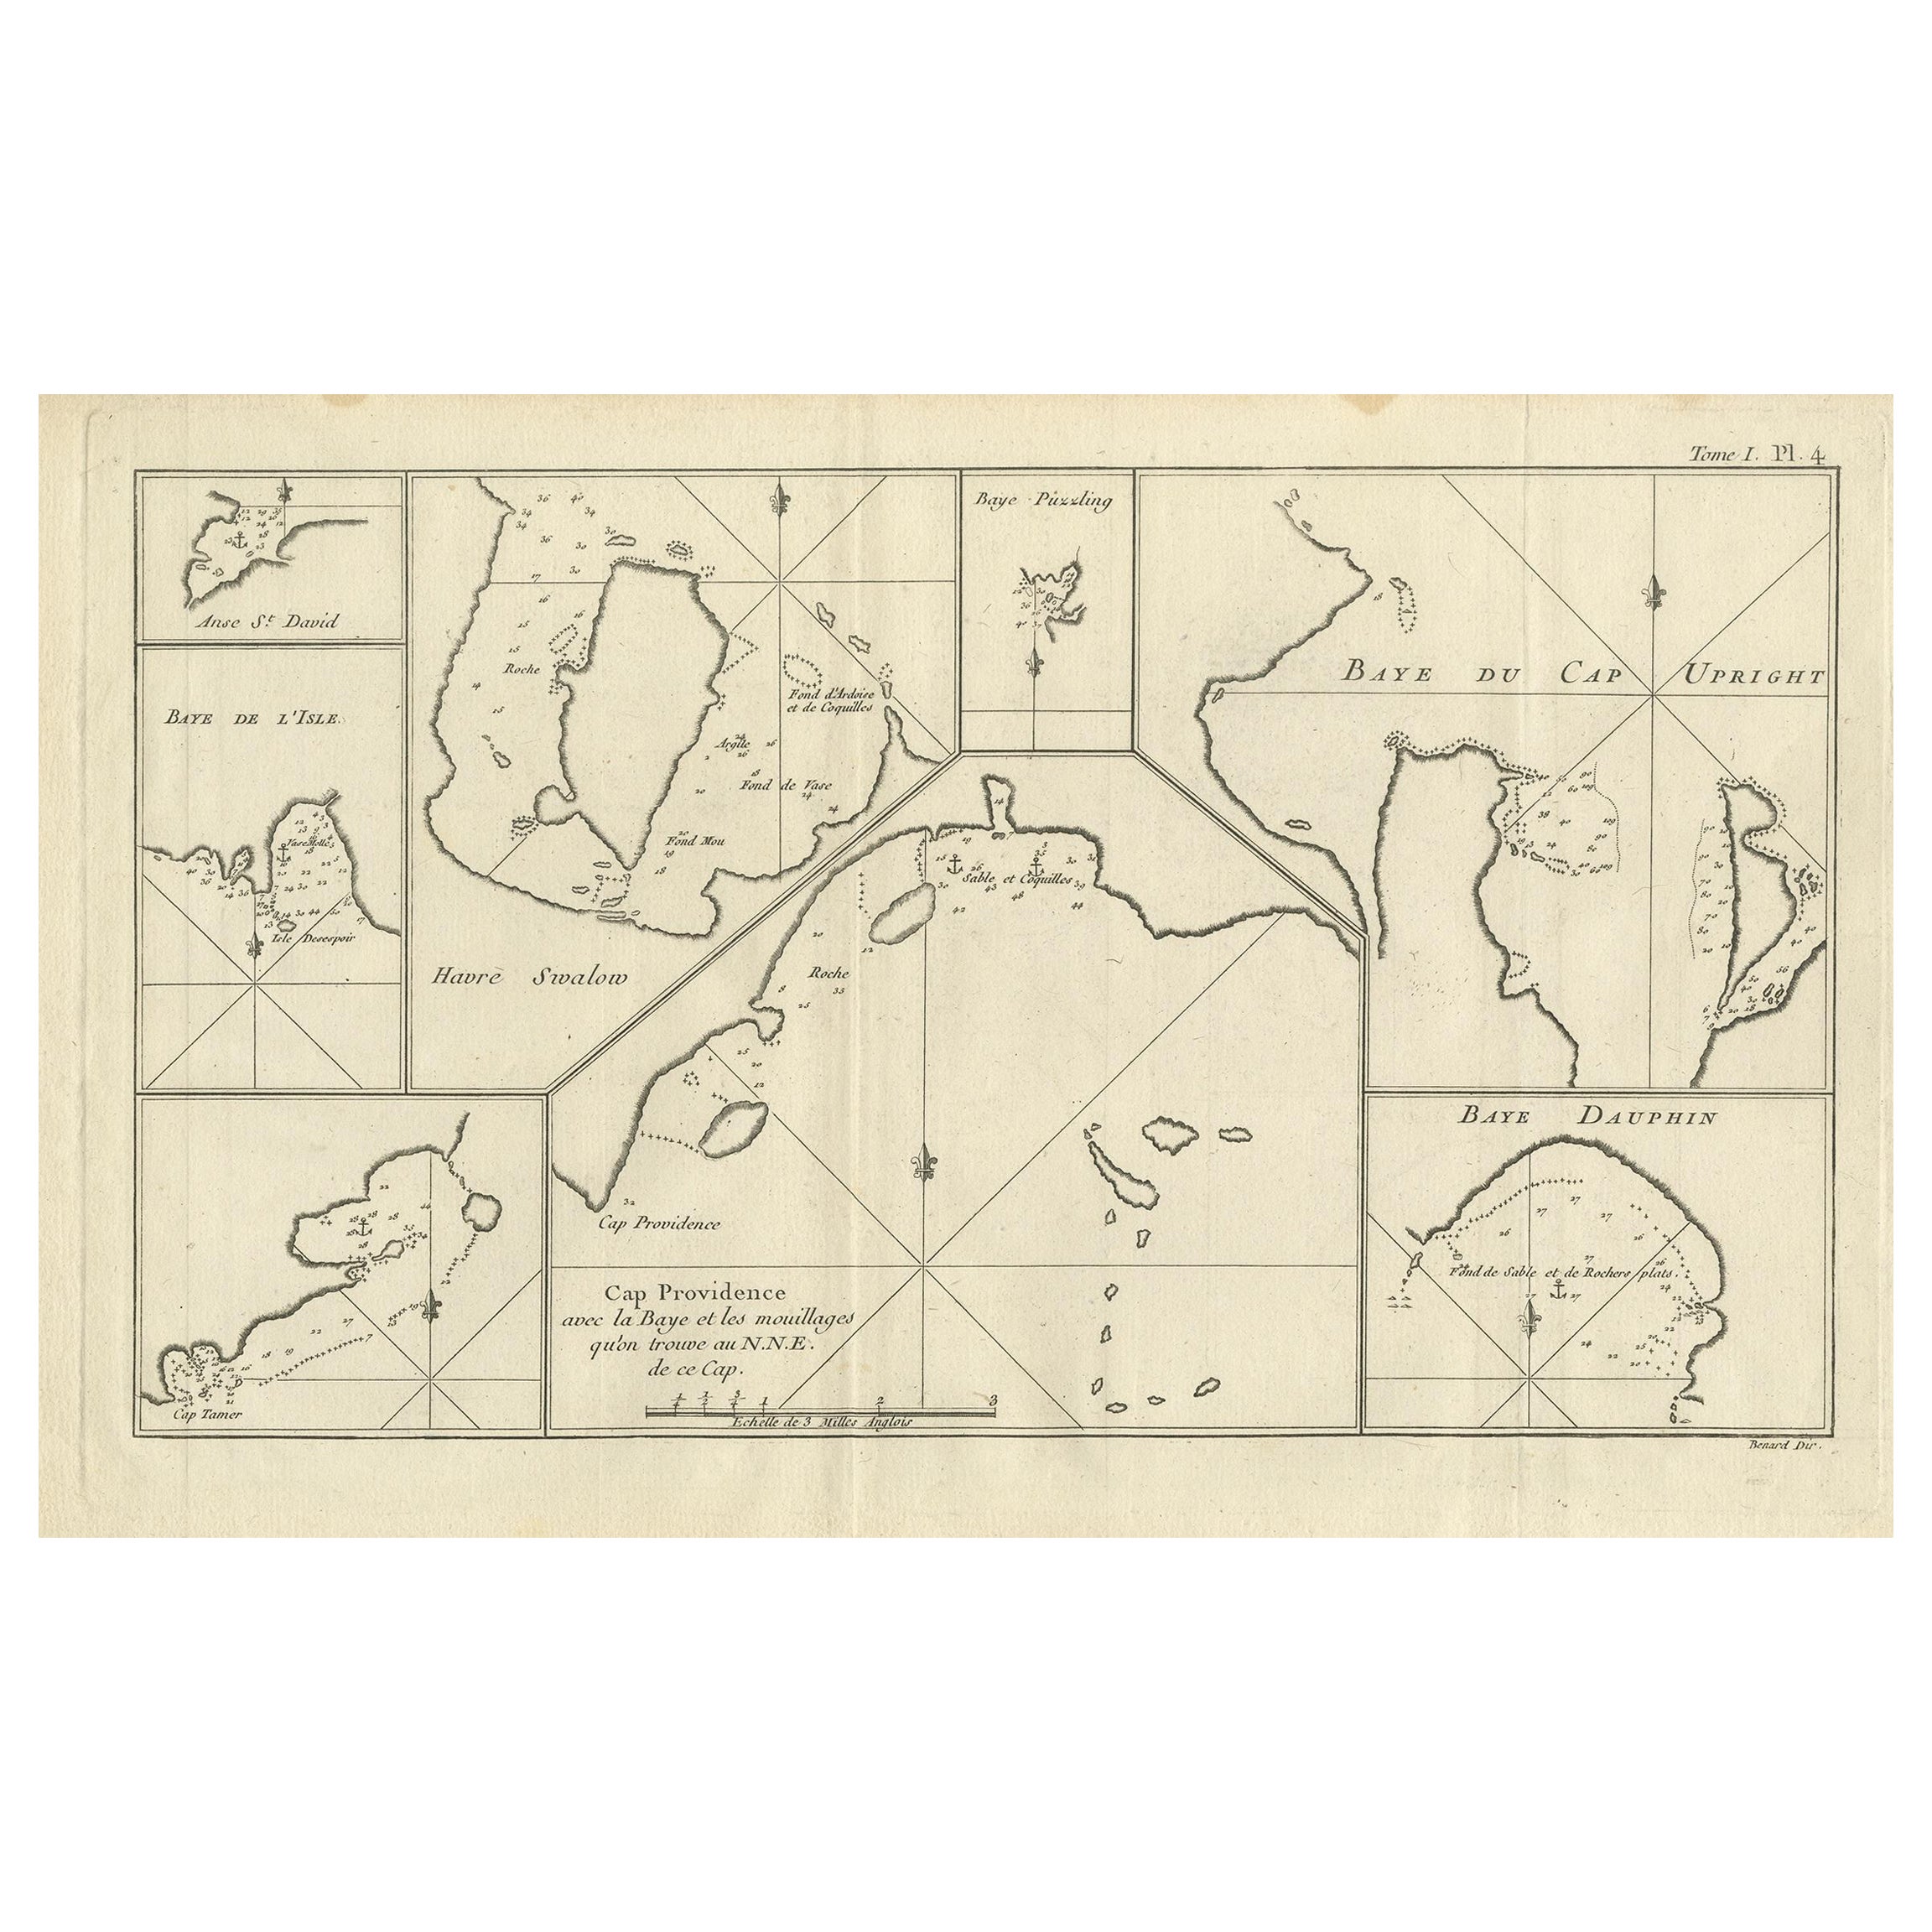 Antique Map of Cap Providence, St. David's Cove and Surroundings For Sale